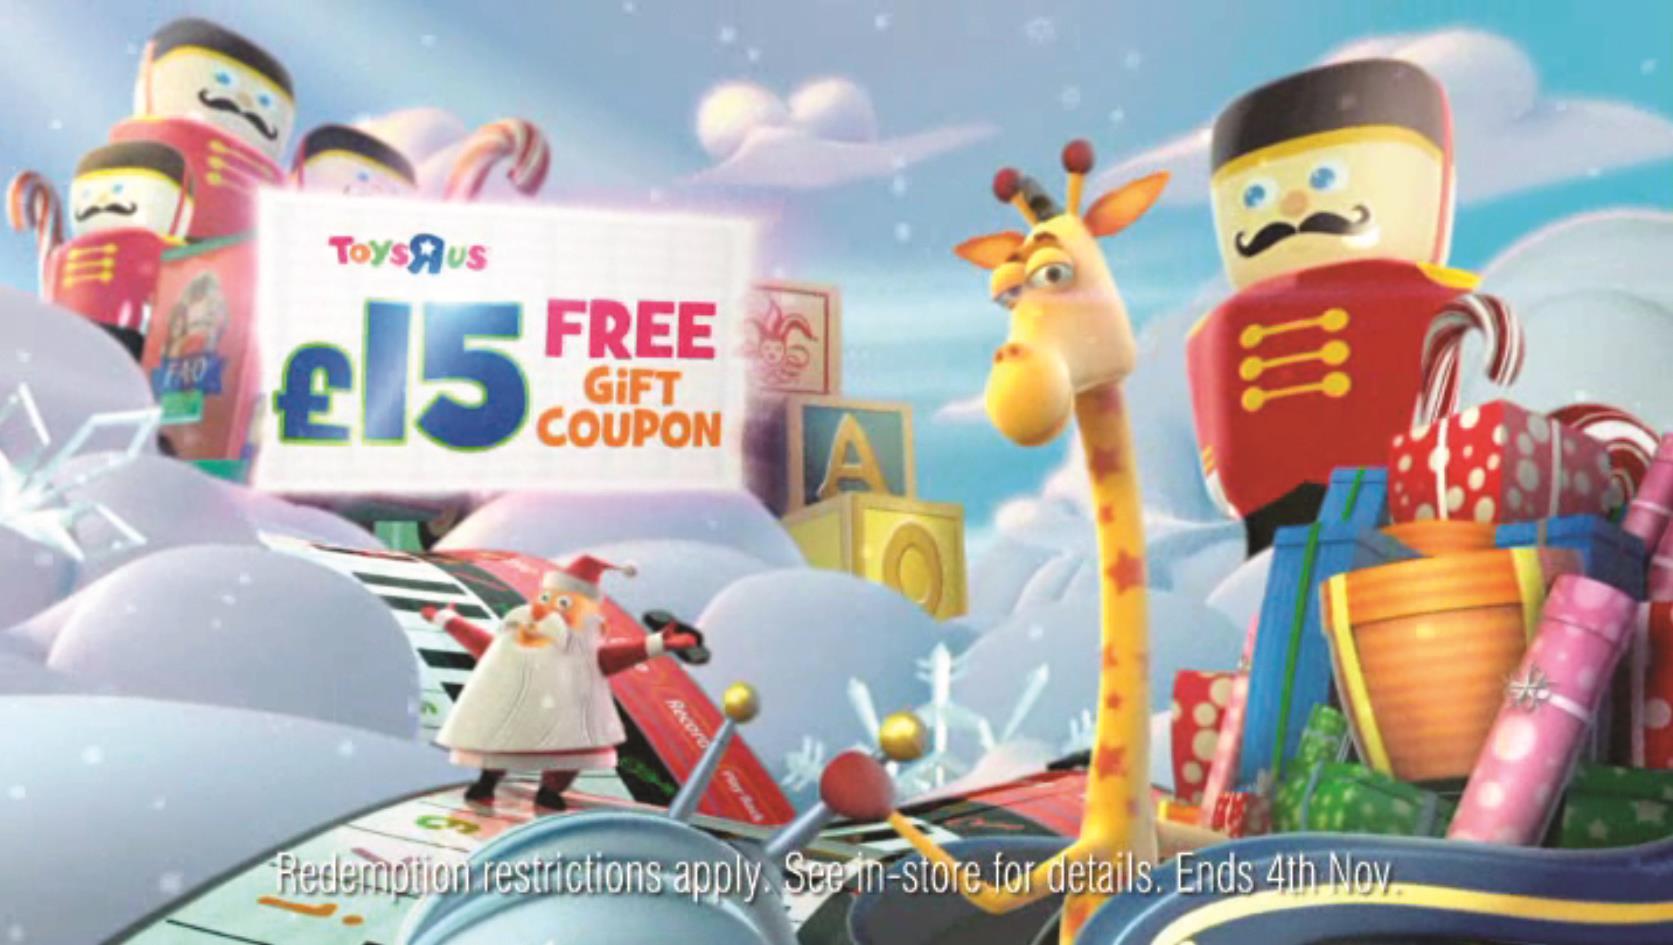 Toys R Us offers Facebook fans chance to star in Christmas TV advert